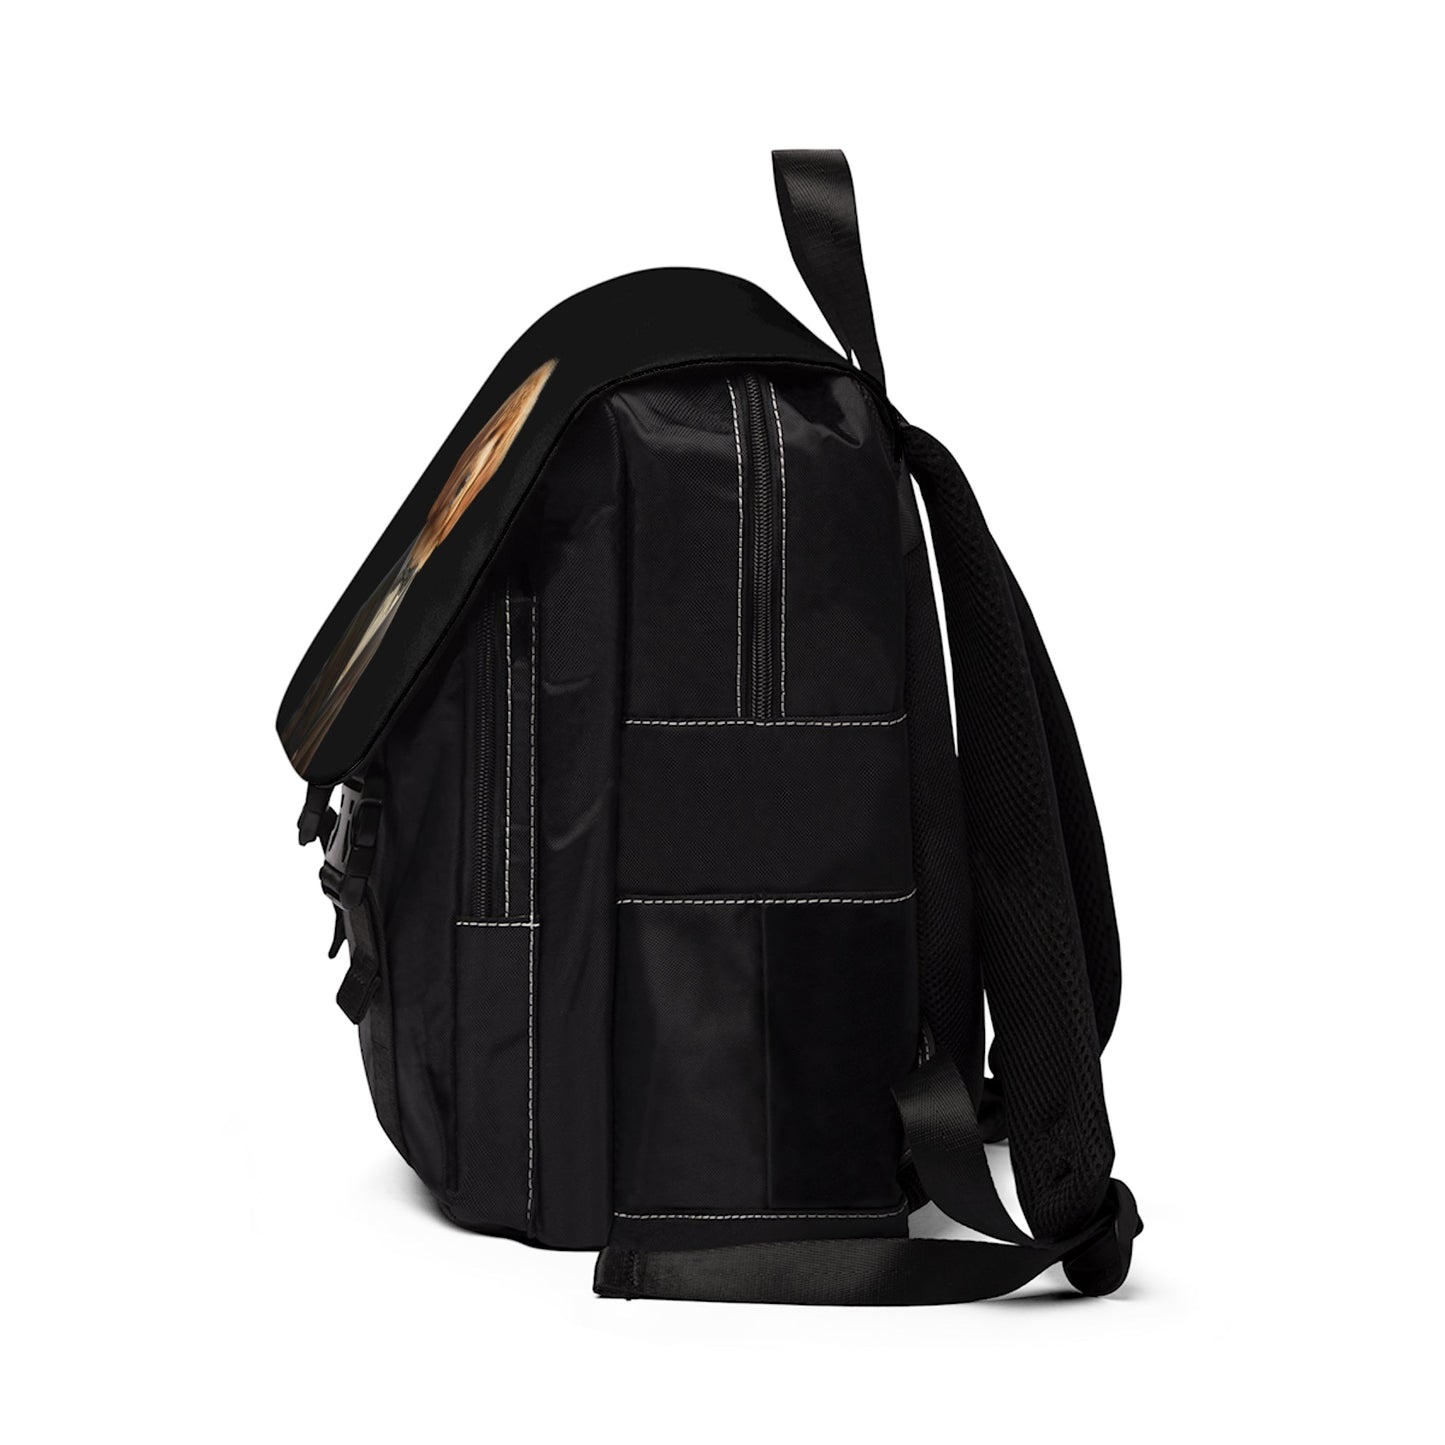 COOPER : Unisex Casual Shoulder Backpack - Shaggy Chic